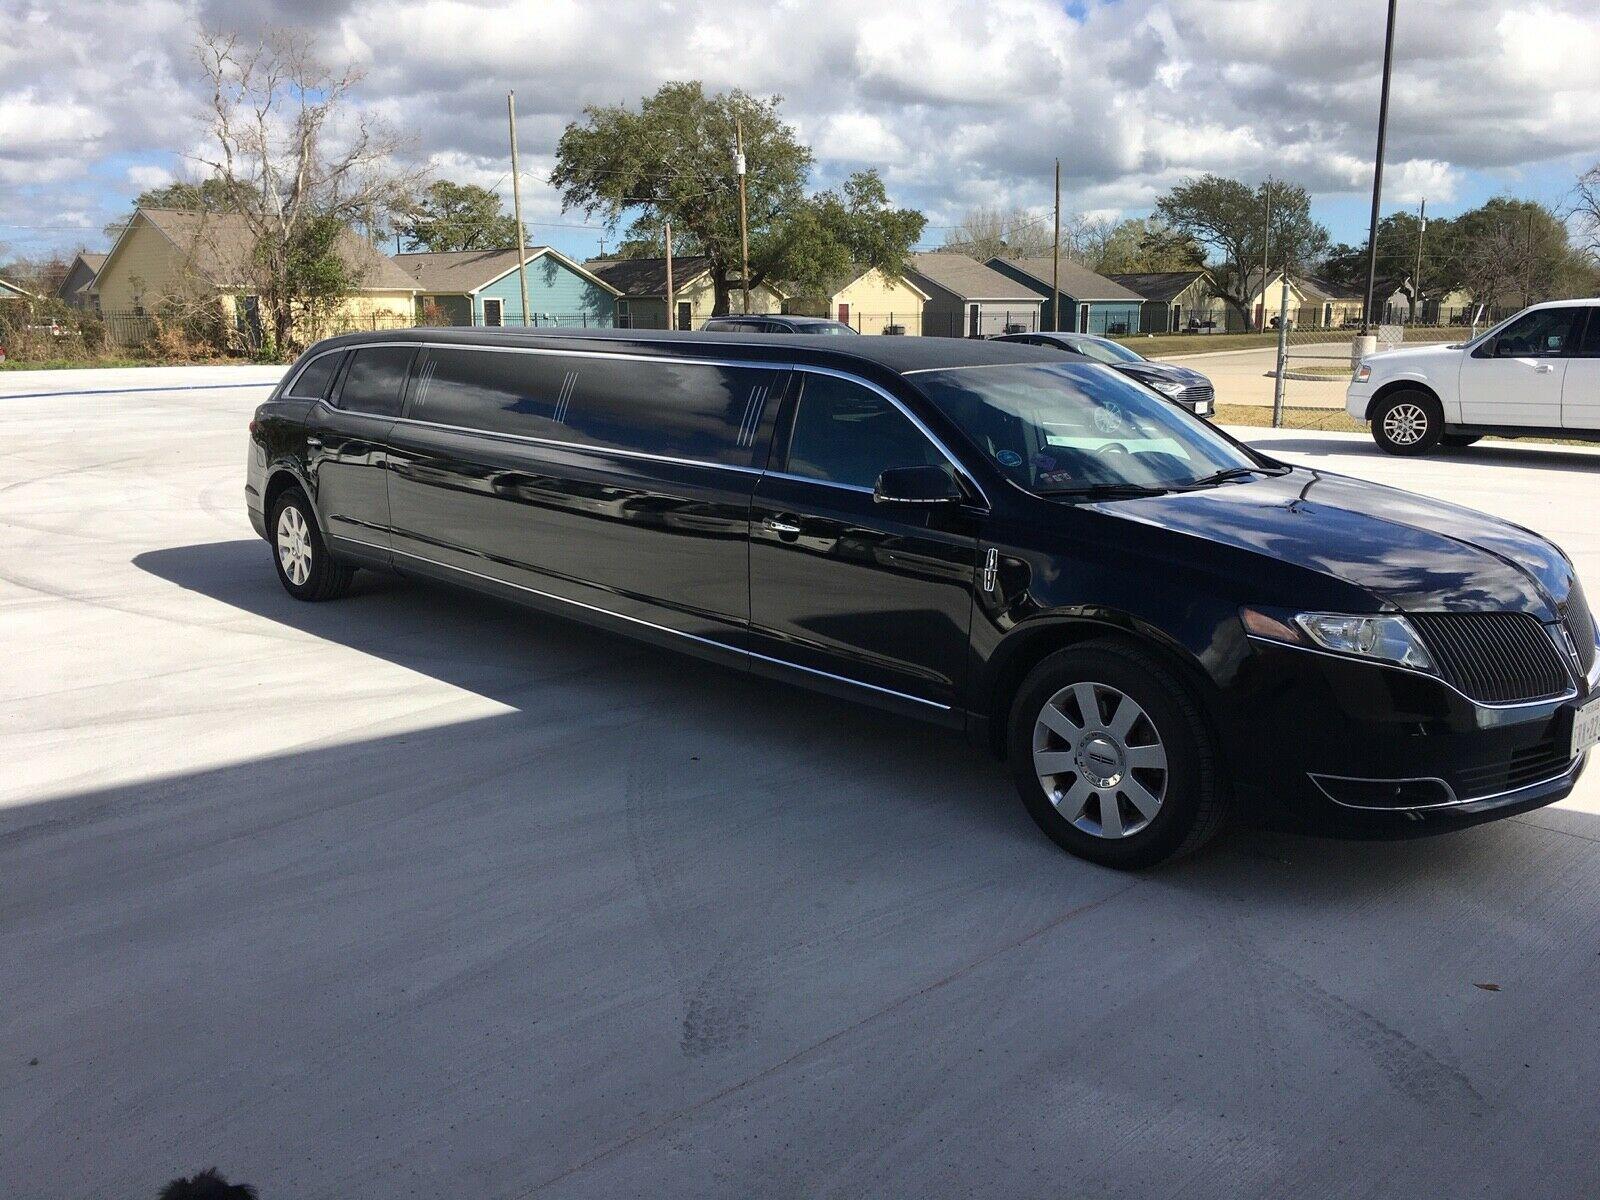 limo service, limousine service, limo for hire,prom limo rental, prom limo rental near me, limo rental for prom, limo rental for prom near me, prom limo service, how much is limo rental for prom, prom party bus rental, prom limo service near me, how much is a limo rental per hour, prom limousine rental, prom limo rental prices, prom party bus rentals near me, prom limo service atlanta ga, prom limo rental atlanta, prom limo service atlanta, prom limo service prices, prom limo service rates, best wedding limo service Cumming ga, best wedding limo service near me, prom limo service atl, prom hummer limo rental, limo rental cost prom,